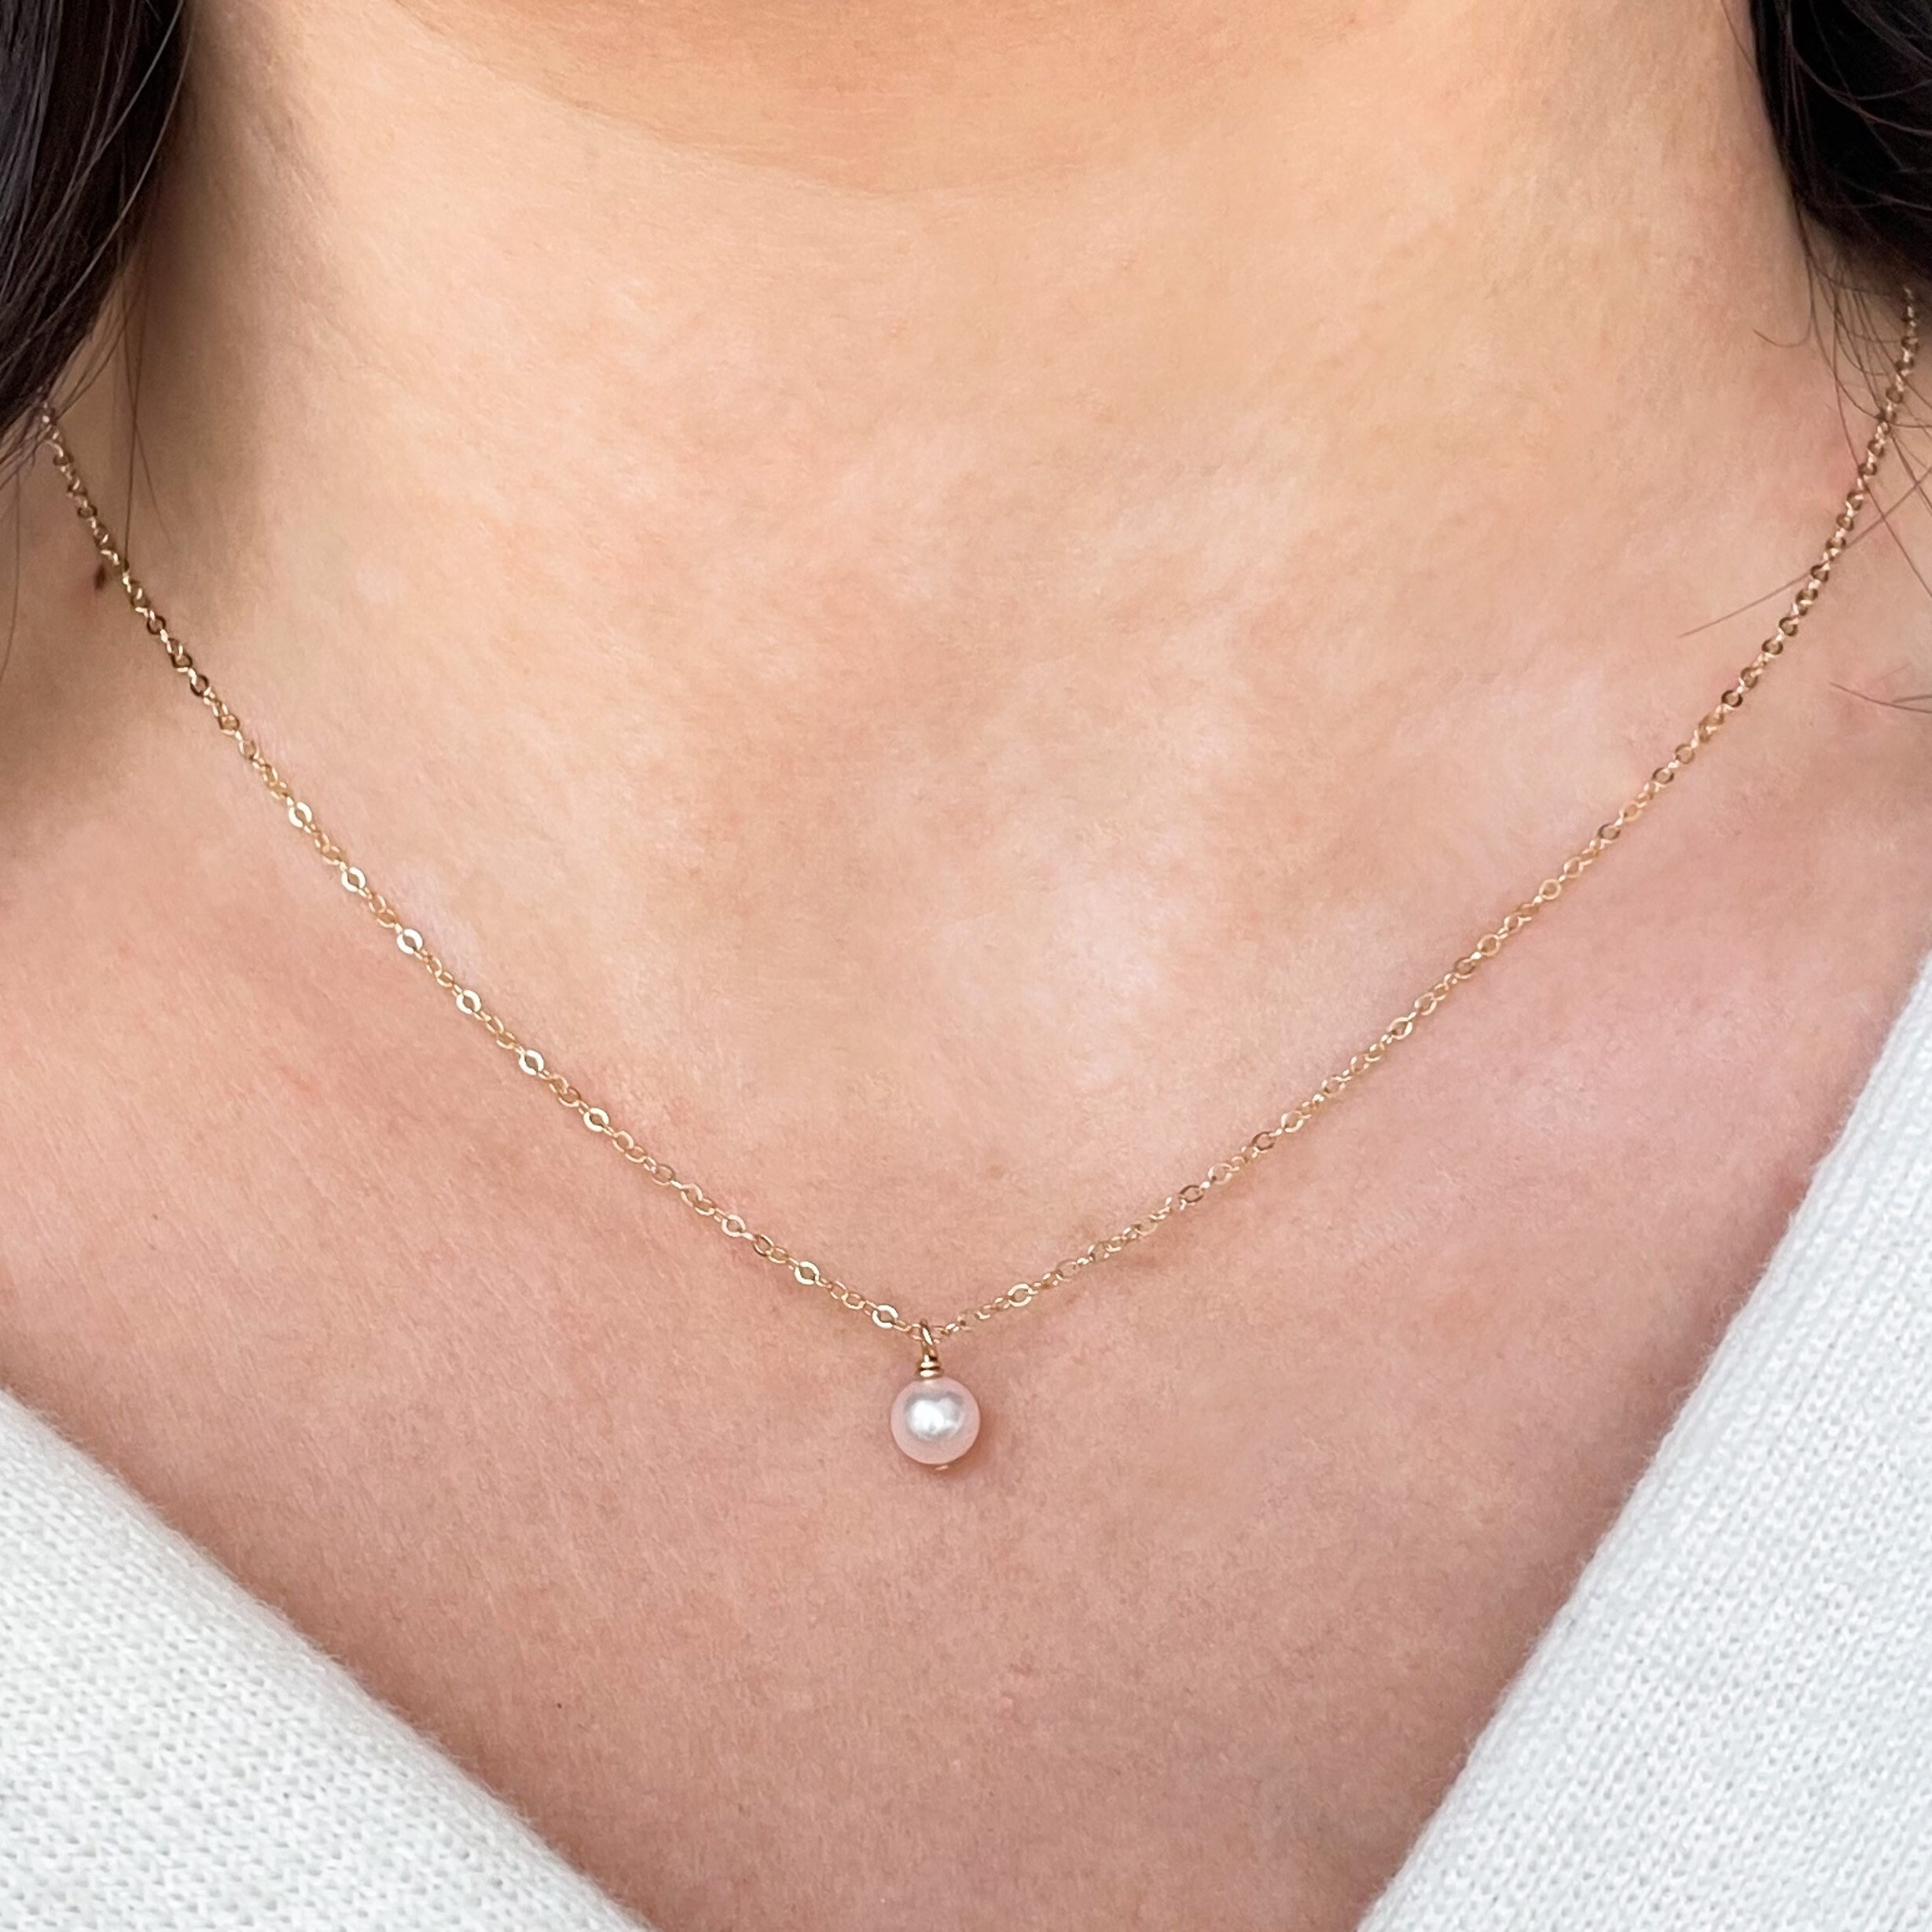 Tiny Pearl Necklace Floating White Pearl Pendant June Birthstone Handmade  Bridesmaid Gift Meaningful Wisdom Gemstone -  Canada